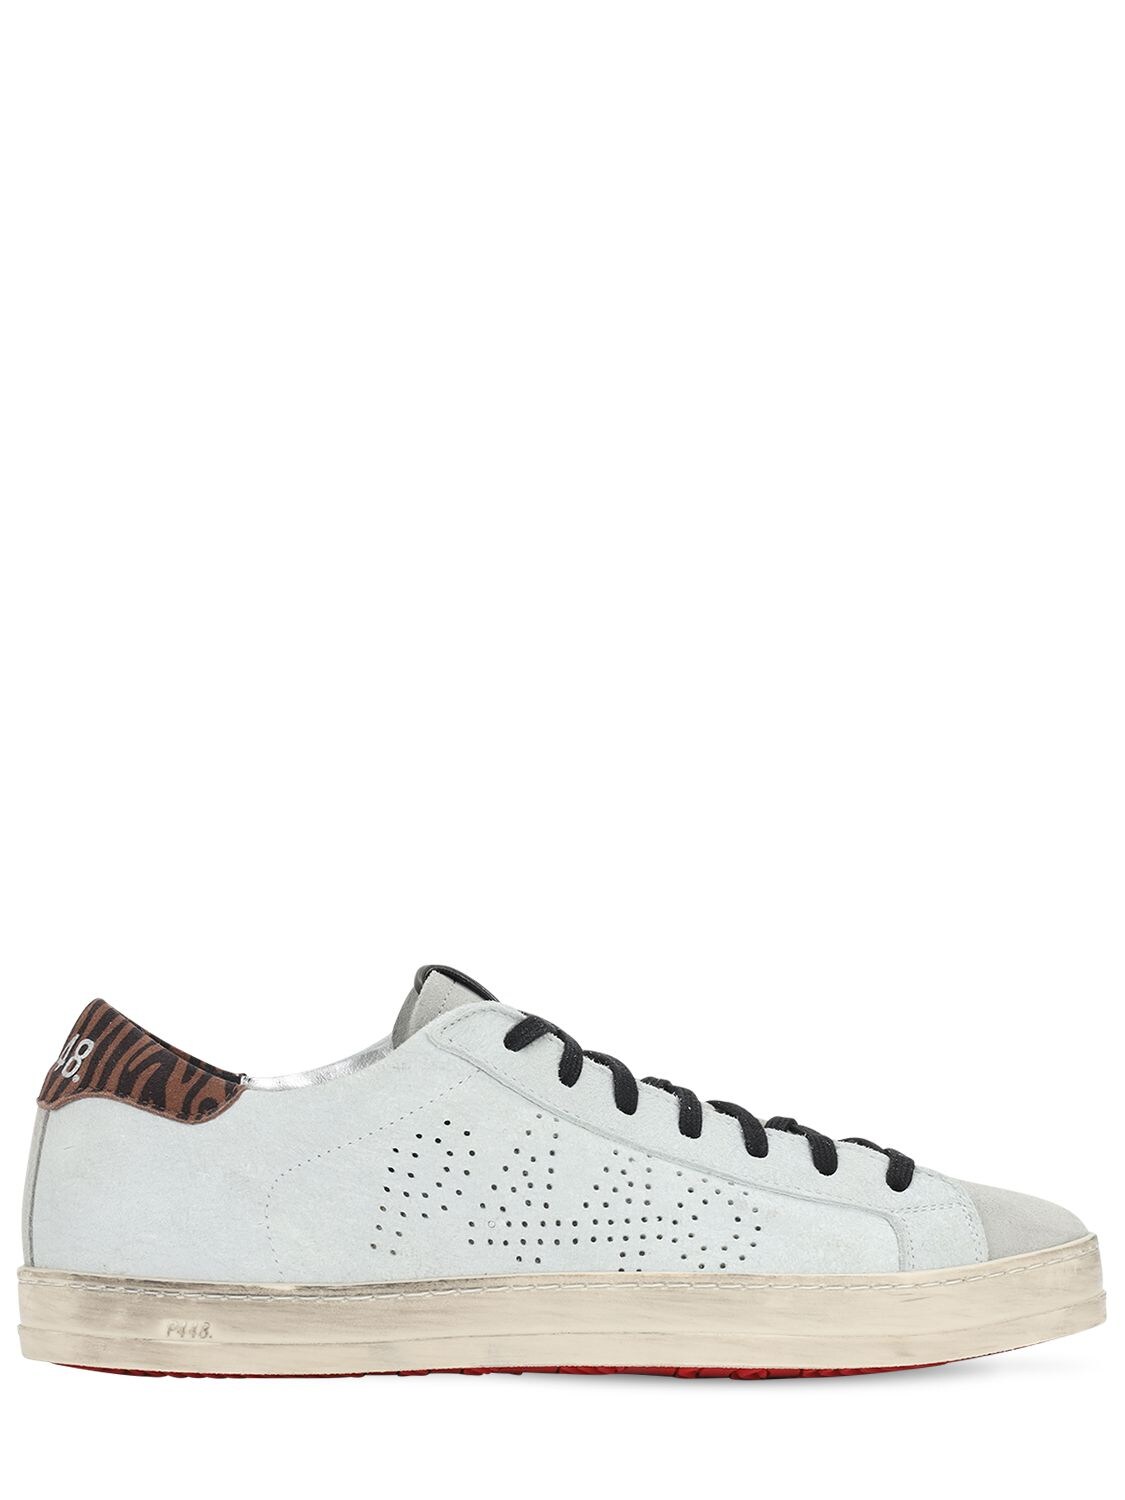 P448 JOHN LEATHER & SUEDE LOW TOP SNEAKERS,72IHLL004-V0HJVEVQT1C1